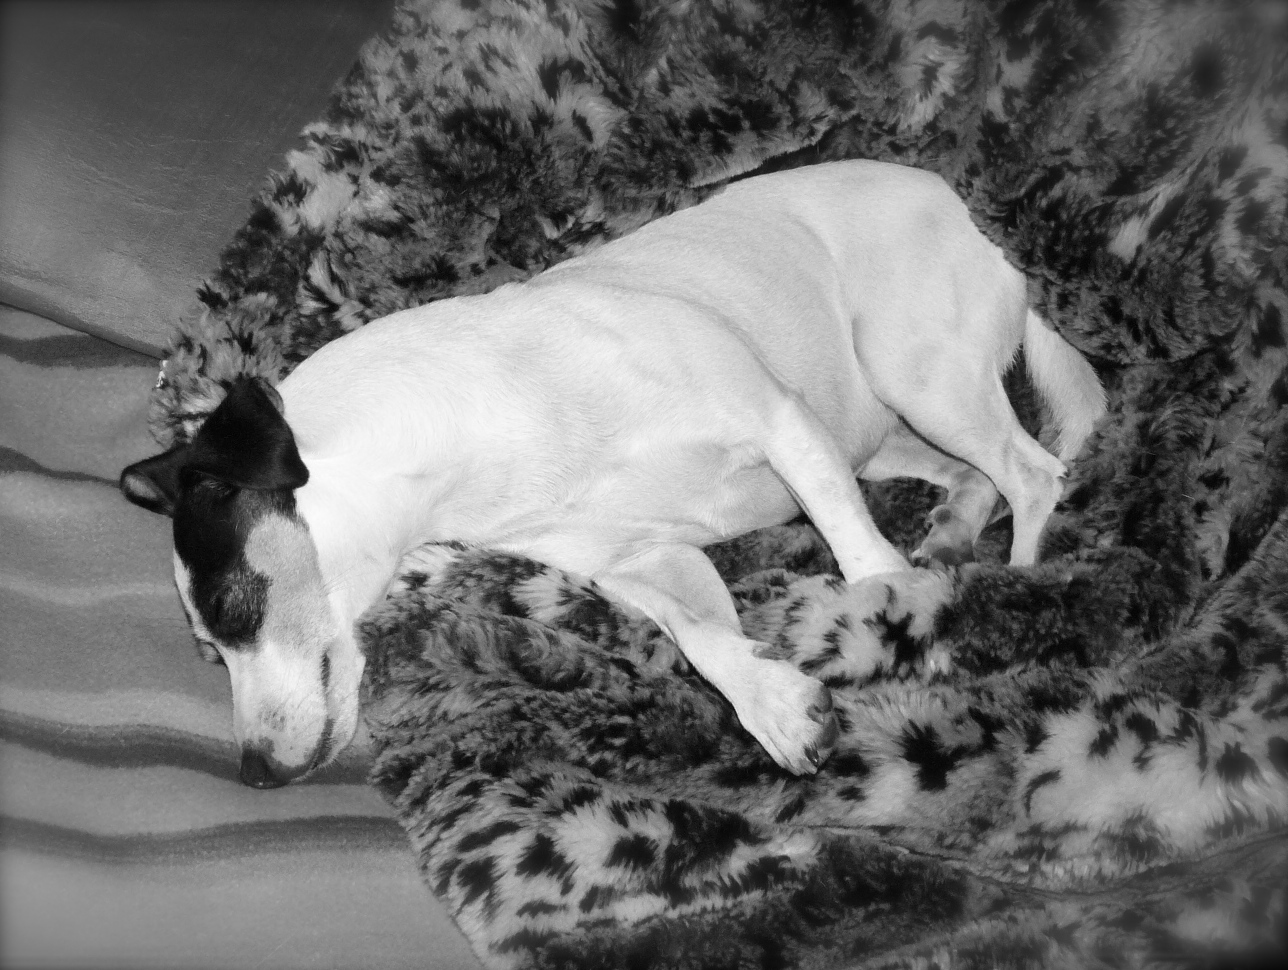  Nap time! Some people say they dream in black and white, others say in color. Do you think I dream in black and white? Or blue and yellow? How do you two dream? 